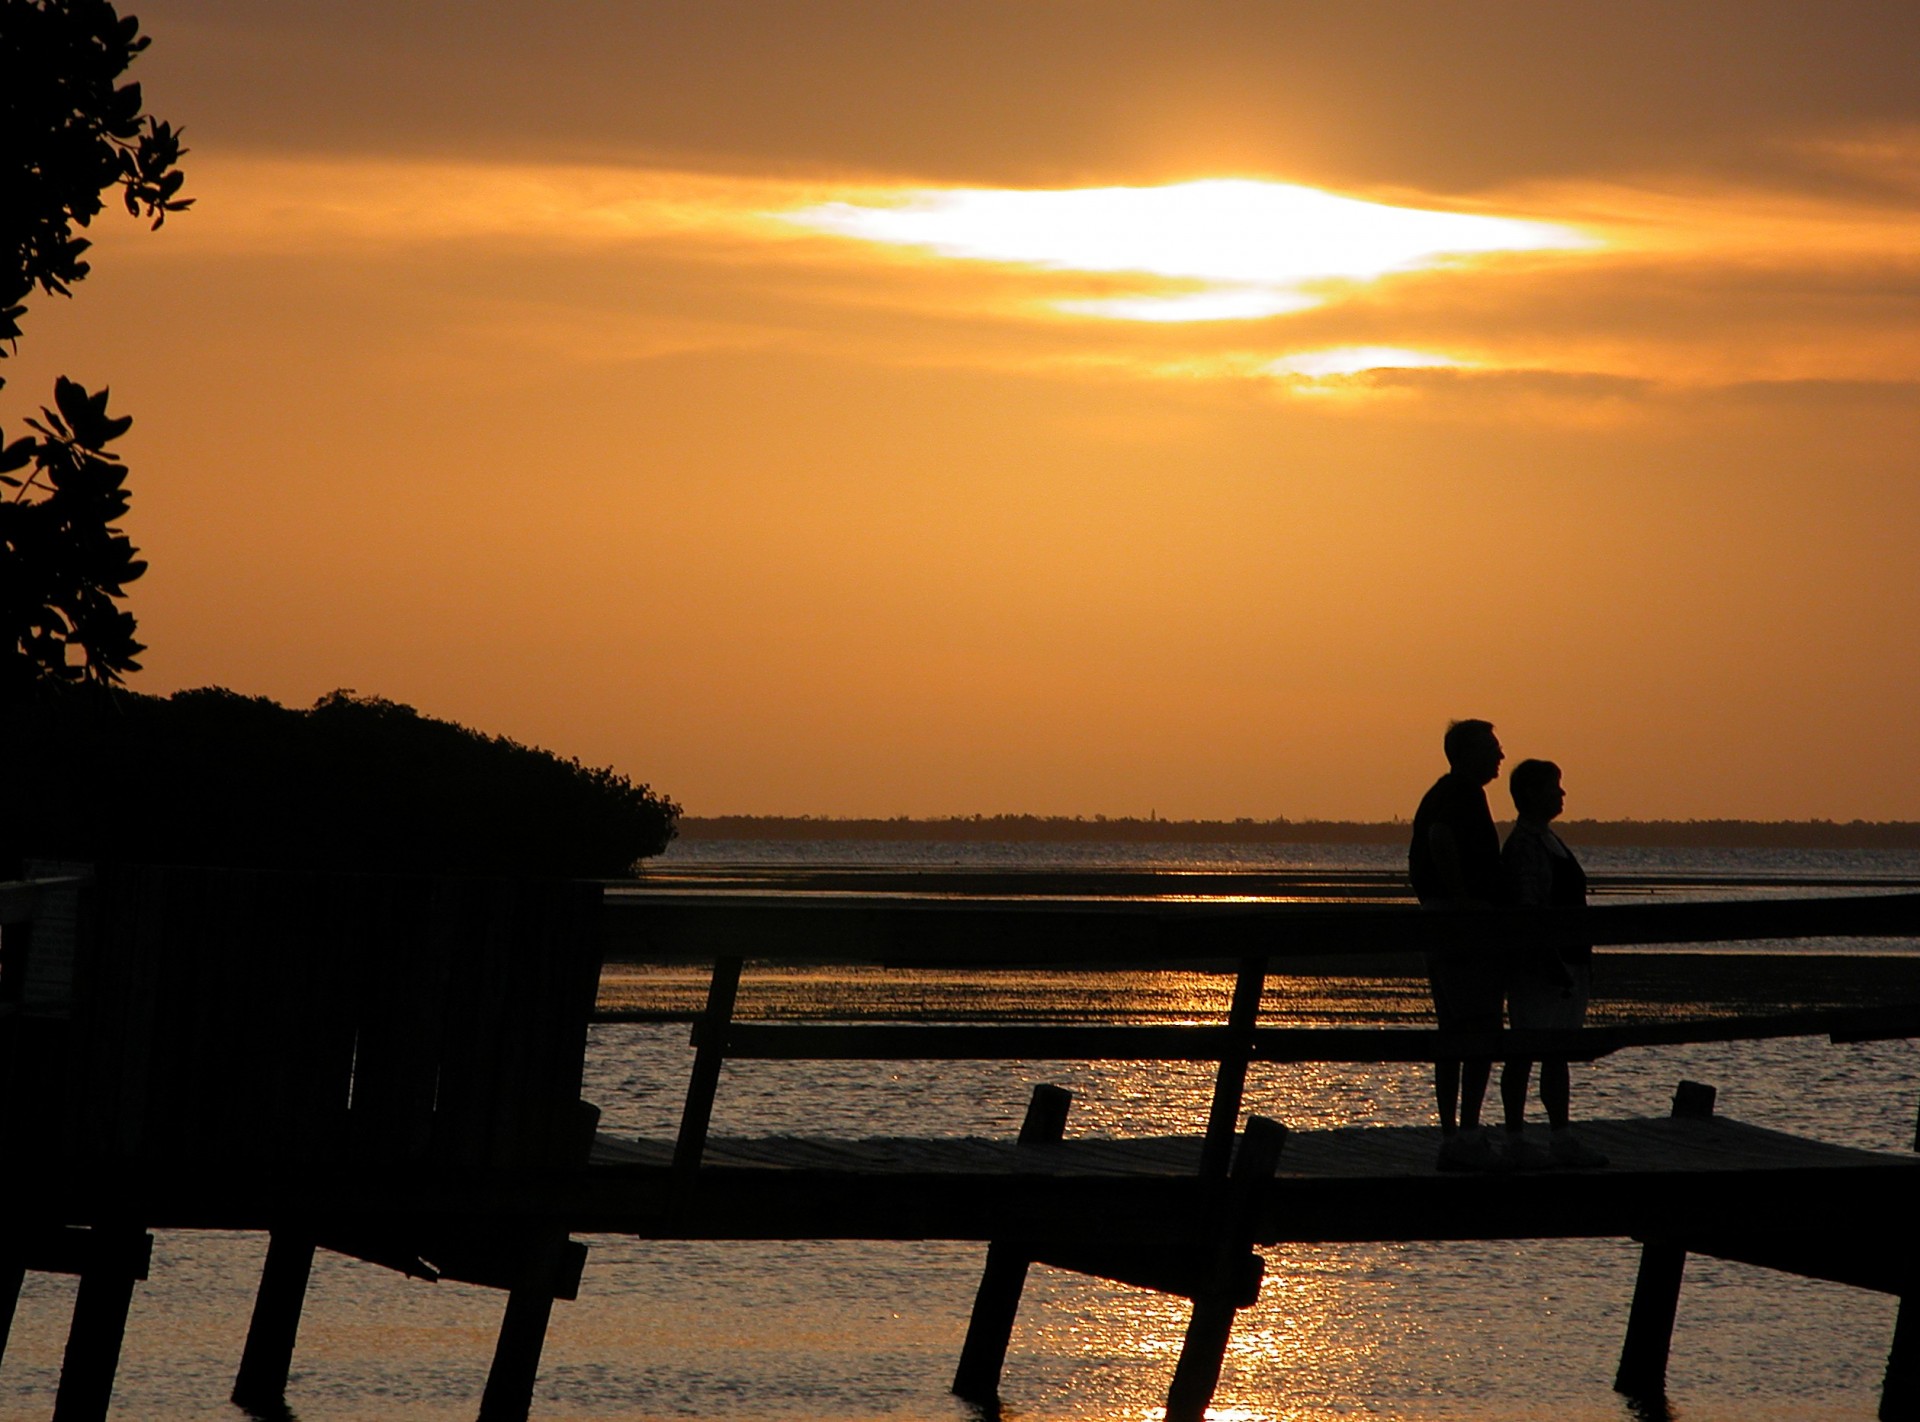 People Silhouetted On Pier